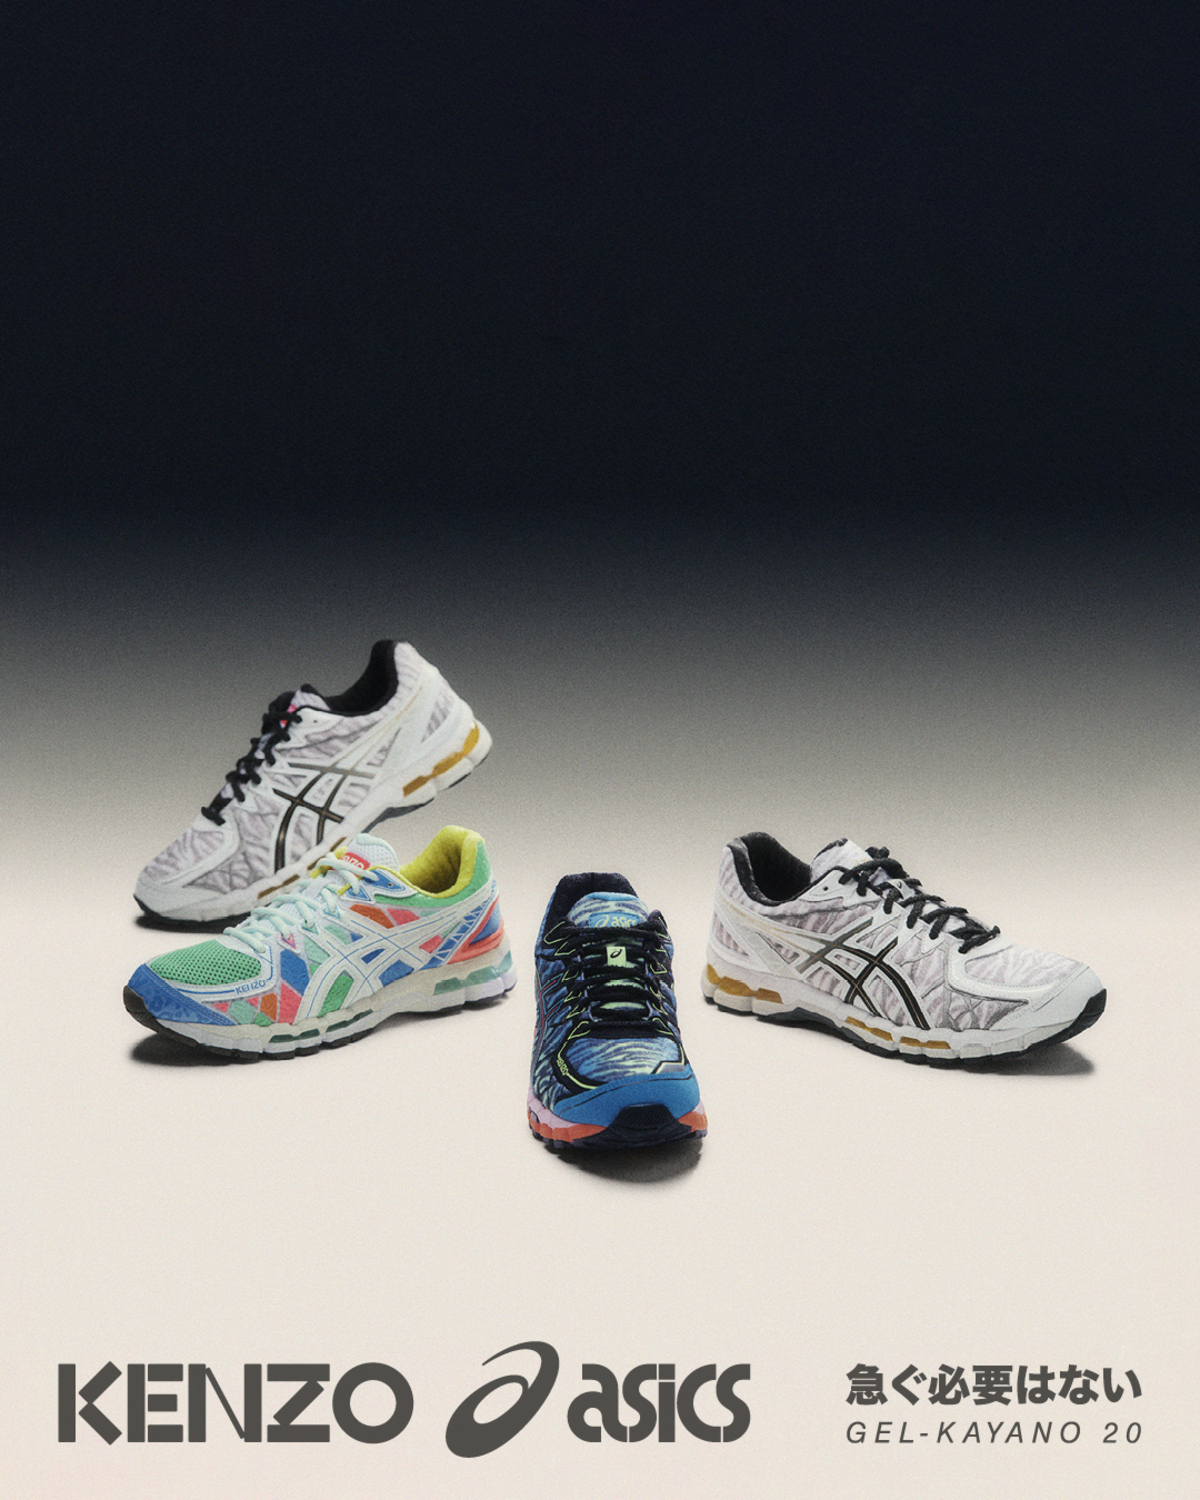 KENZO & ASICS Officially Unite for Gel-Kayano 20 Trio – PAUSE Online ...